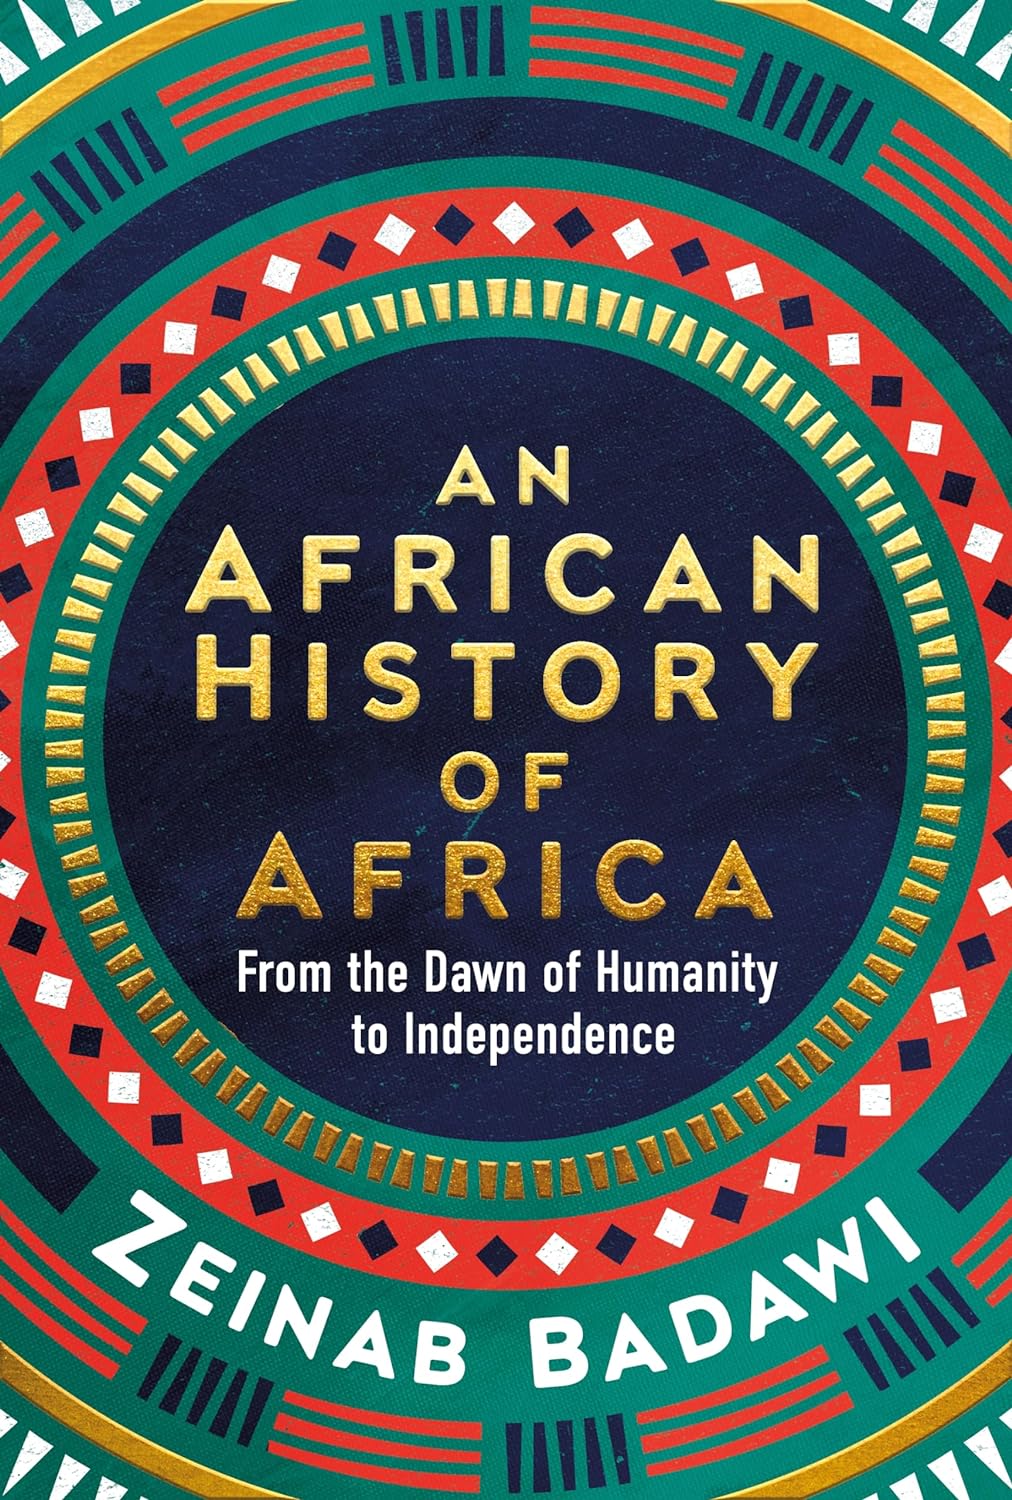 An African History of Africa From the Dawn of Humanity to Independence by Zeinab Badawi